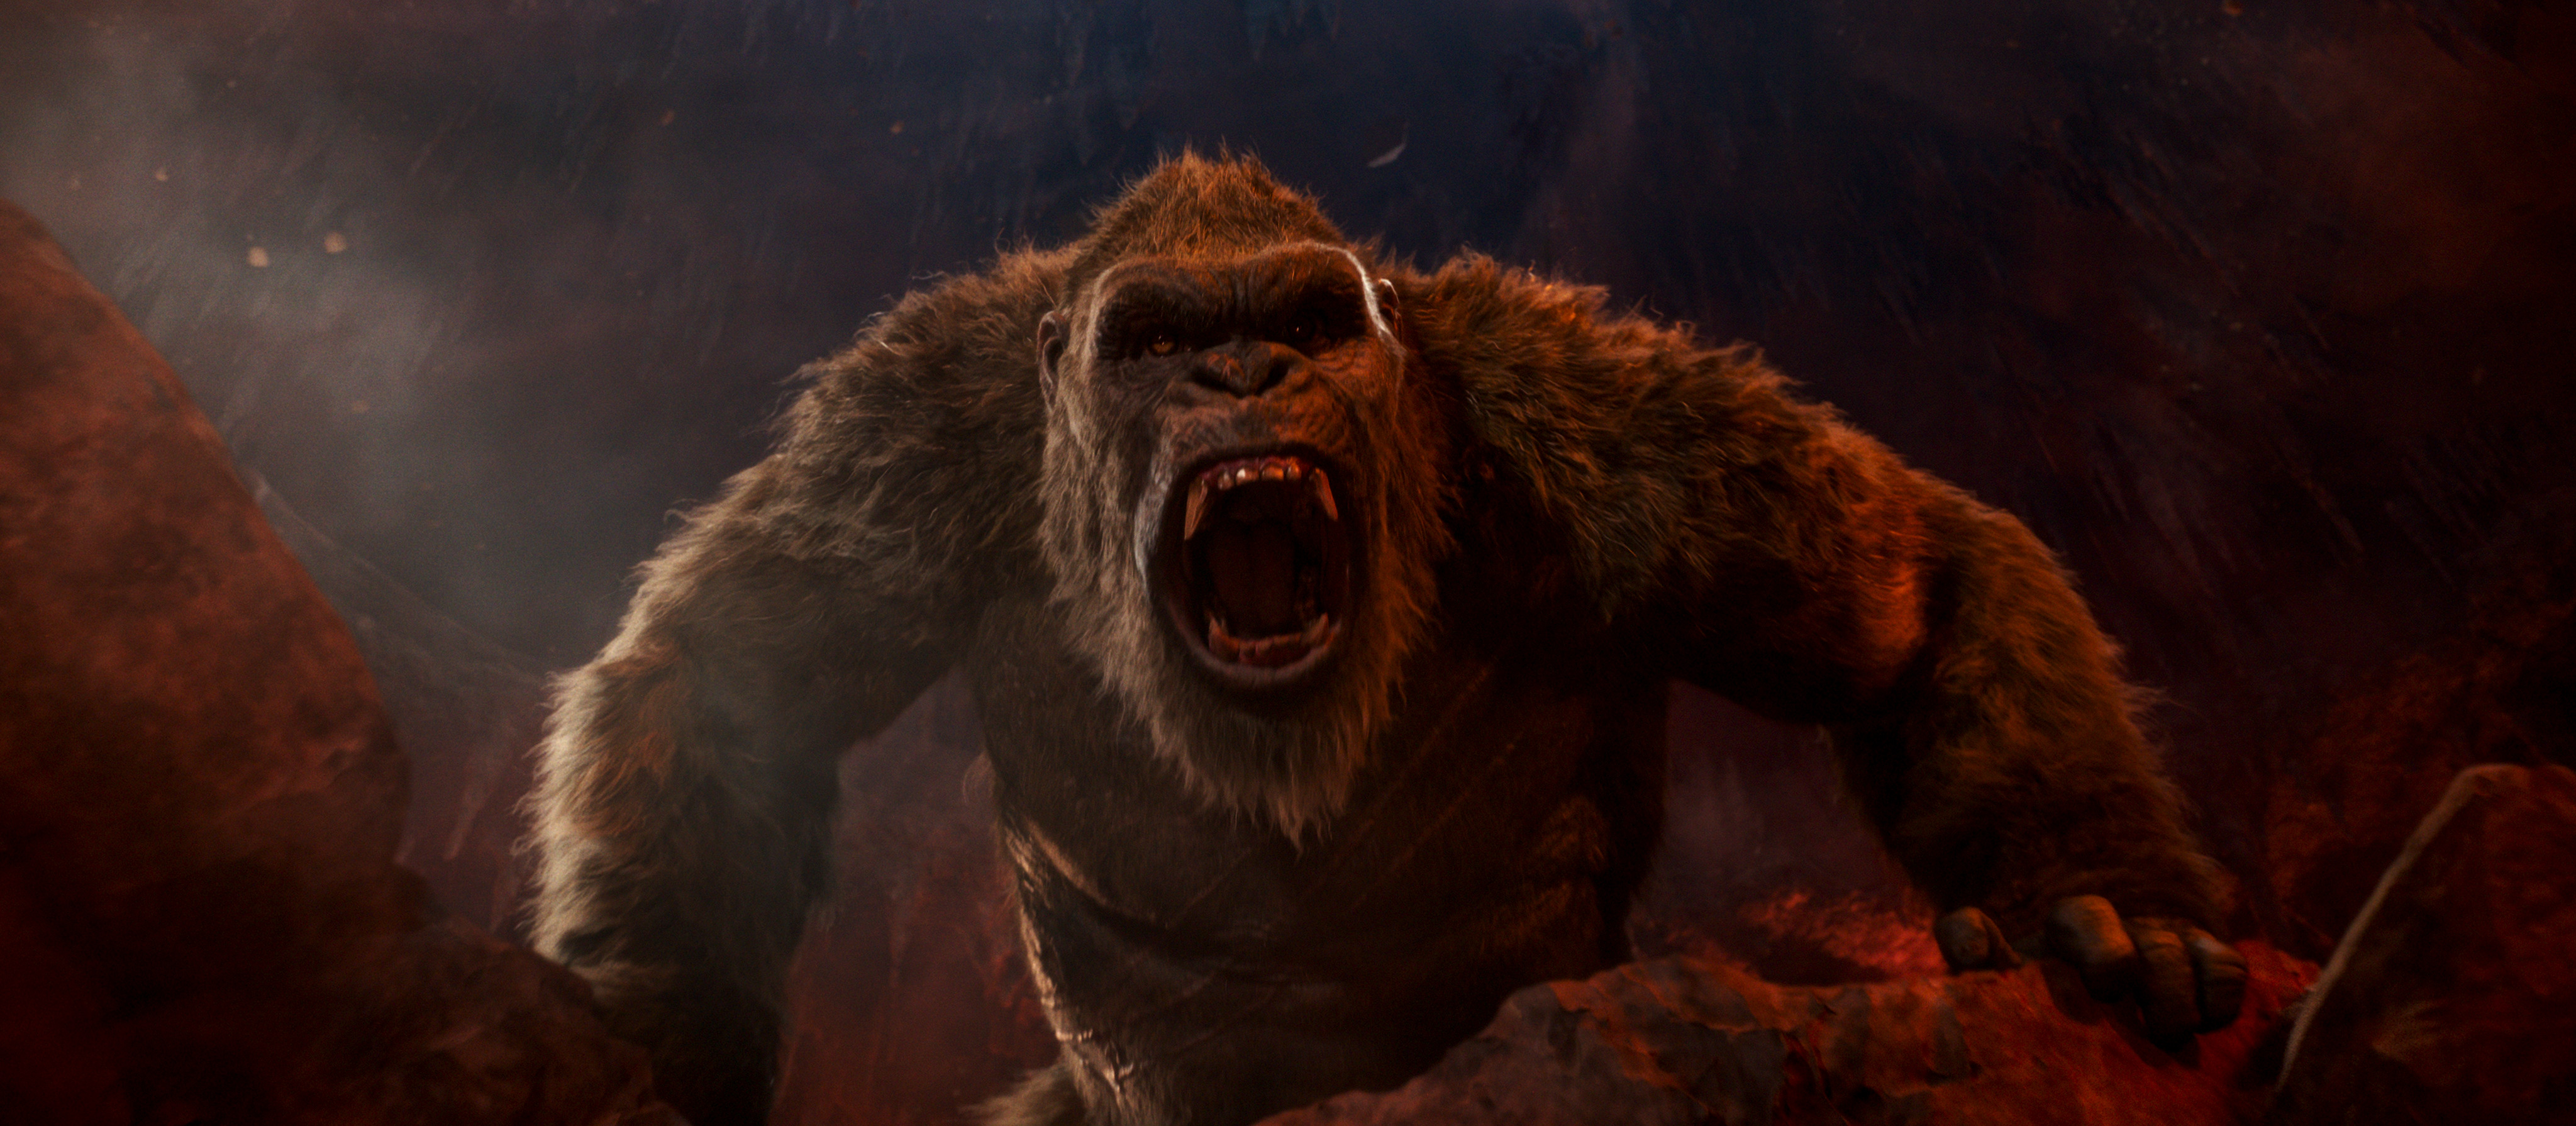 King Kong' TV Series In Works At Disney+ From Disney Branded Television